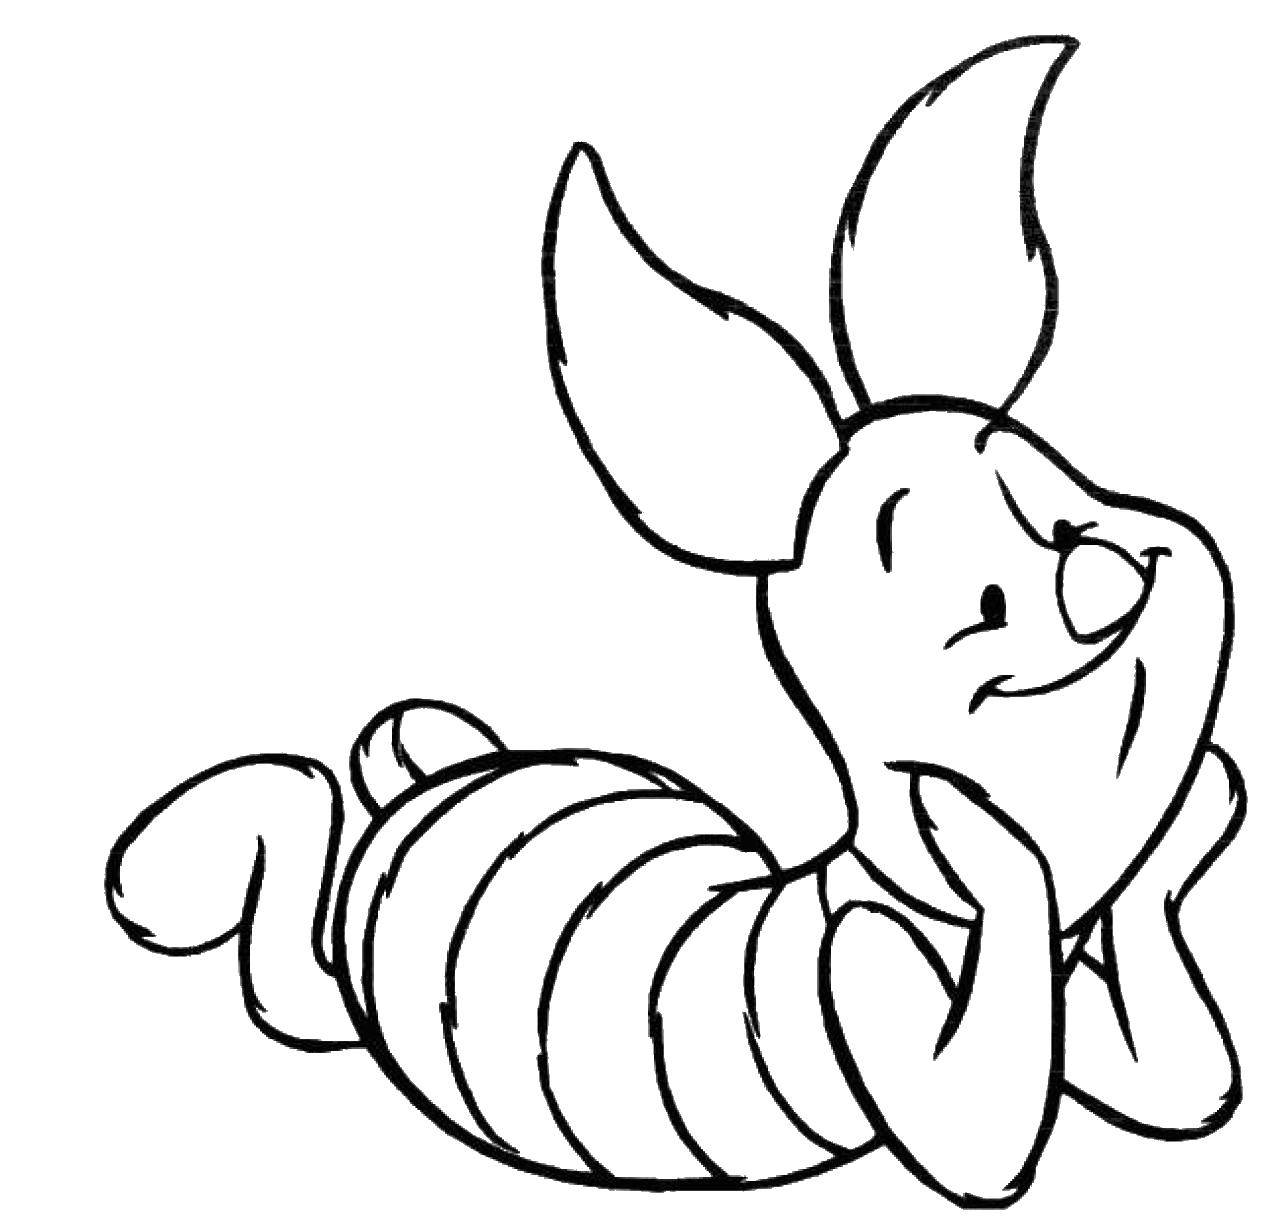 Coloring Piglet. Category Disney coloring pages. Tags:  Cartoon character, Winnie the Pooh, Piglet.